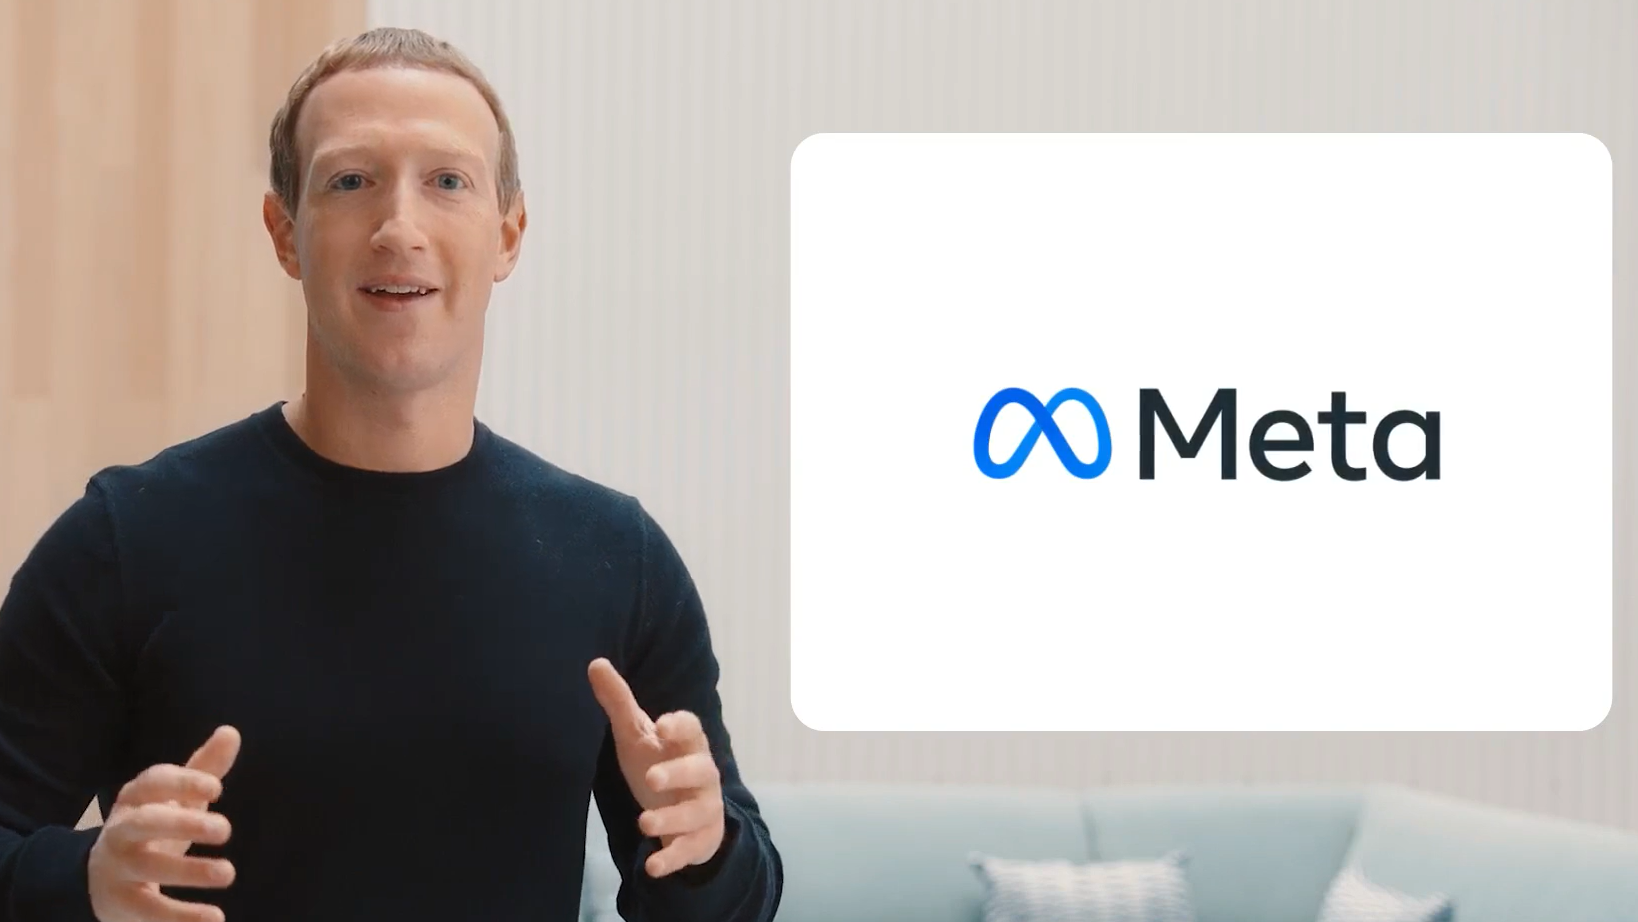 All about Facebook's transition to Meta in 3 minutes